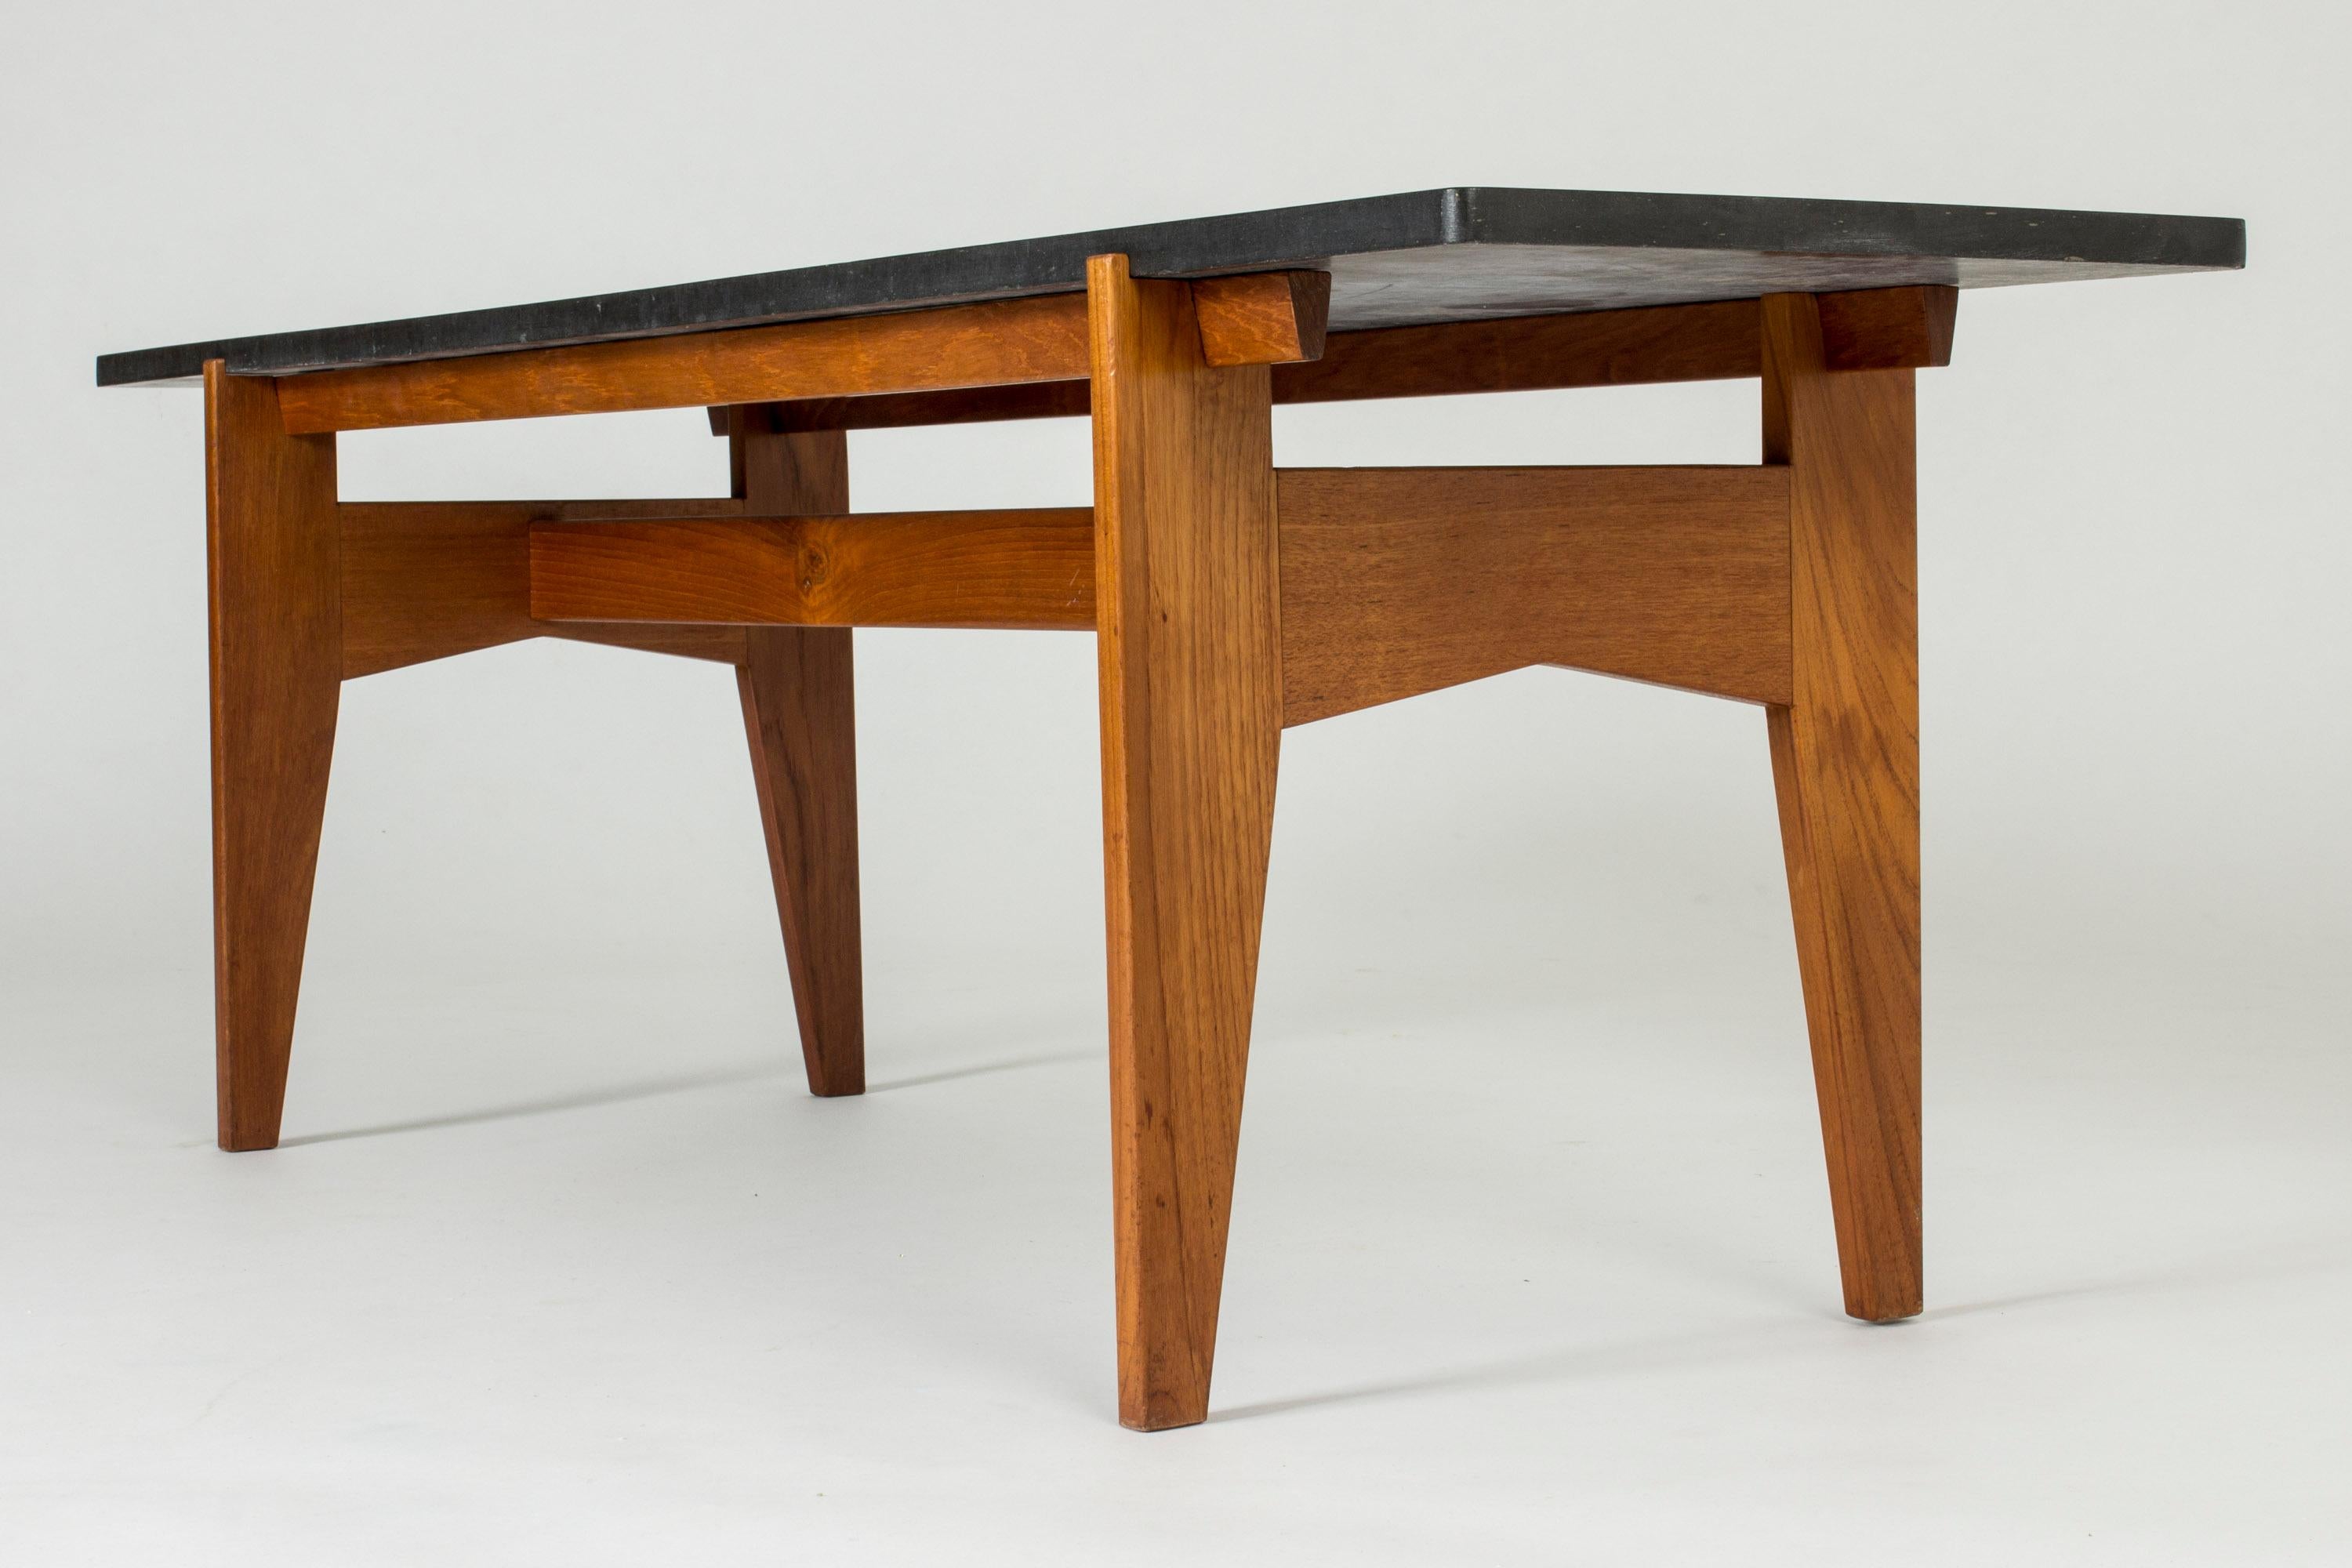 Teak and Marble Coffee Table by Hans-Agne Jakobsson 1